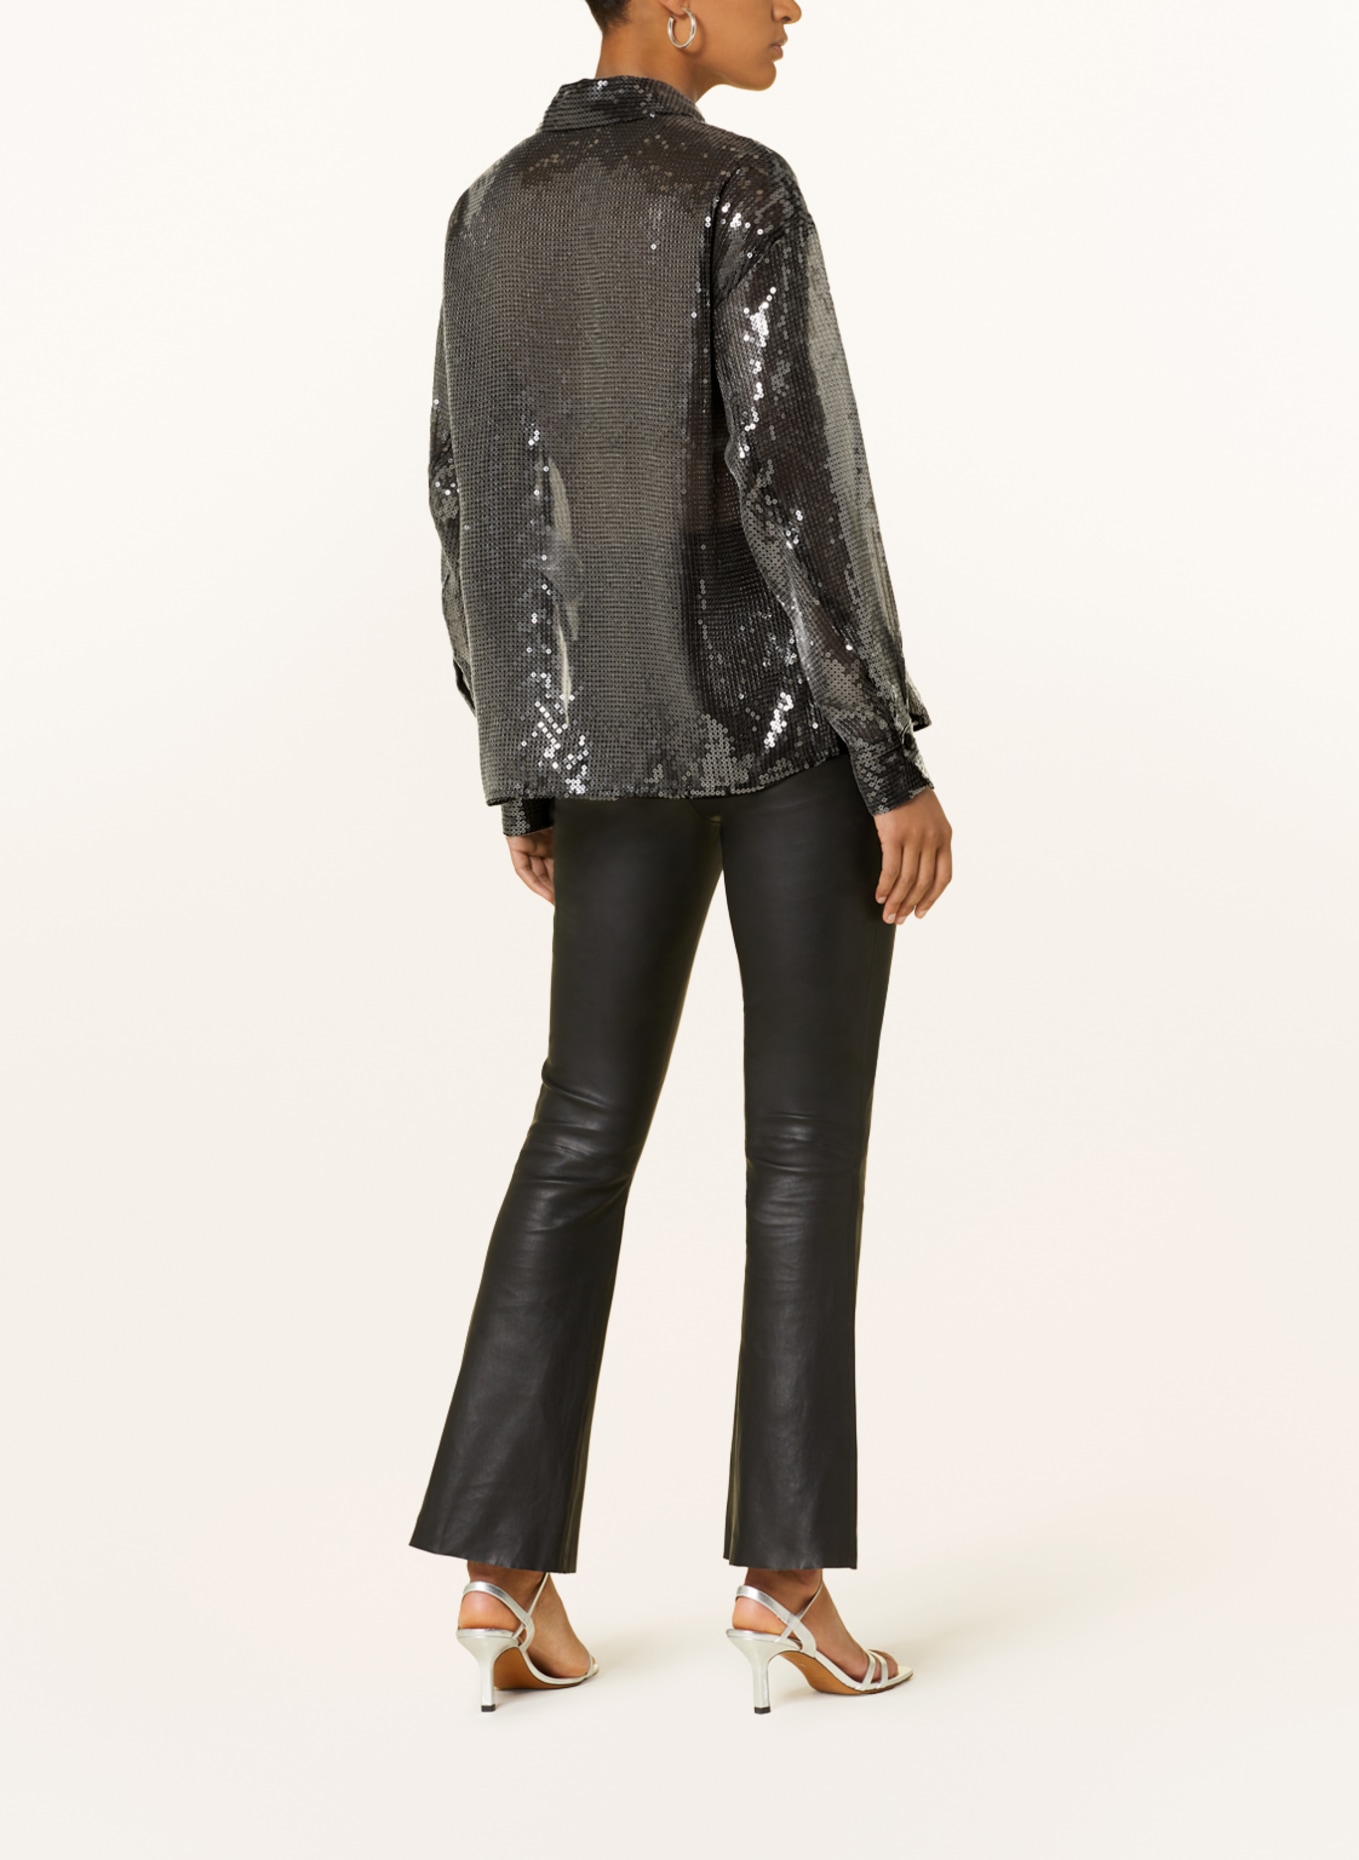 RIANI Shirt blouse with sequins, Color: DARK GRAY (Image 3)